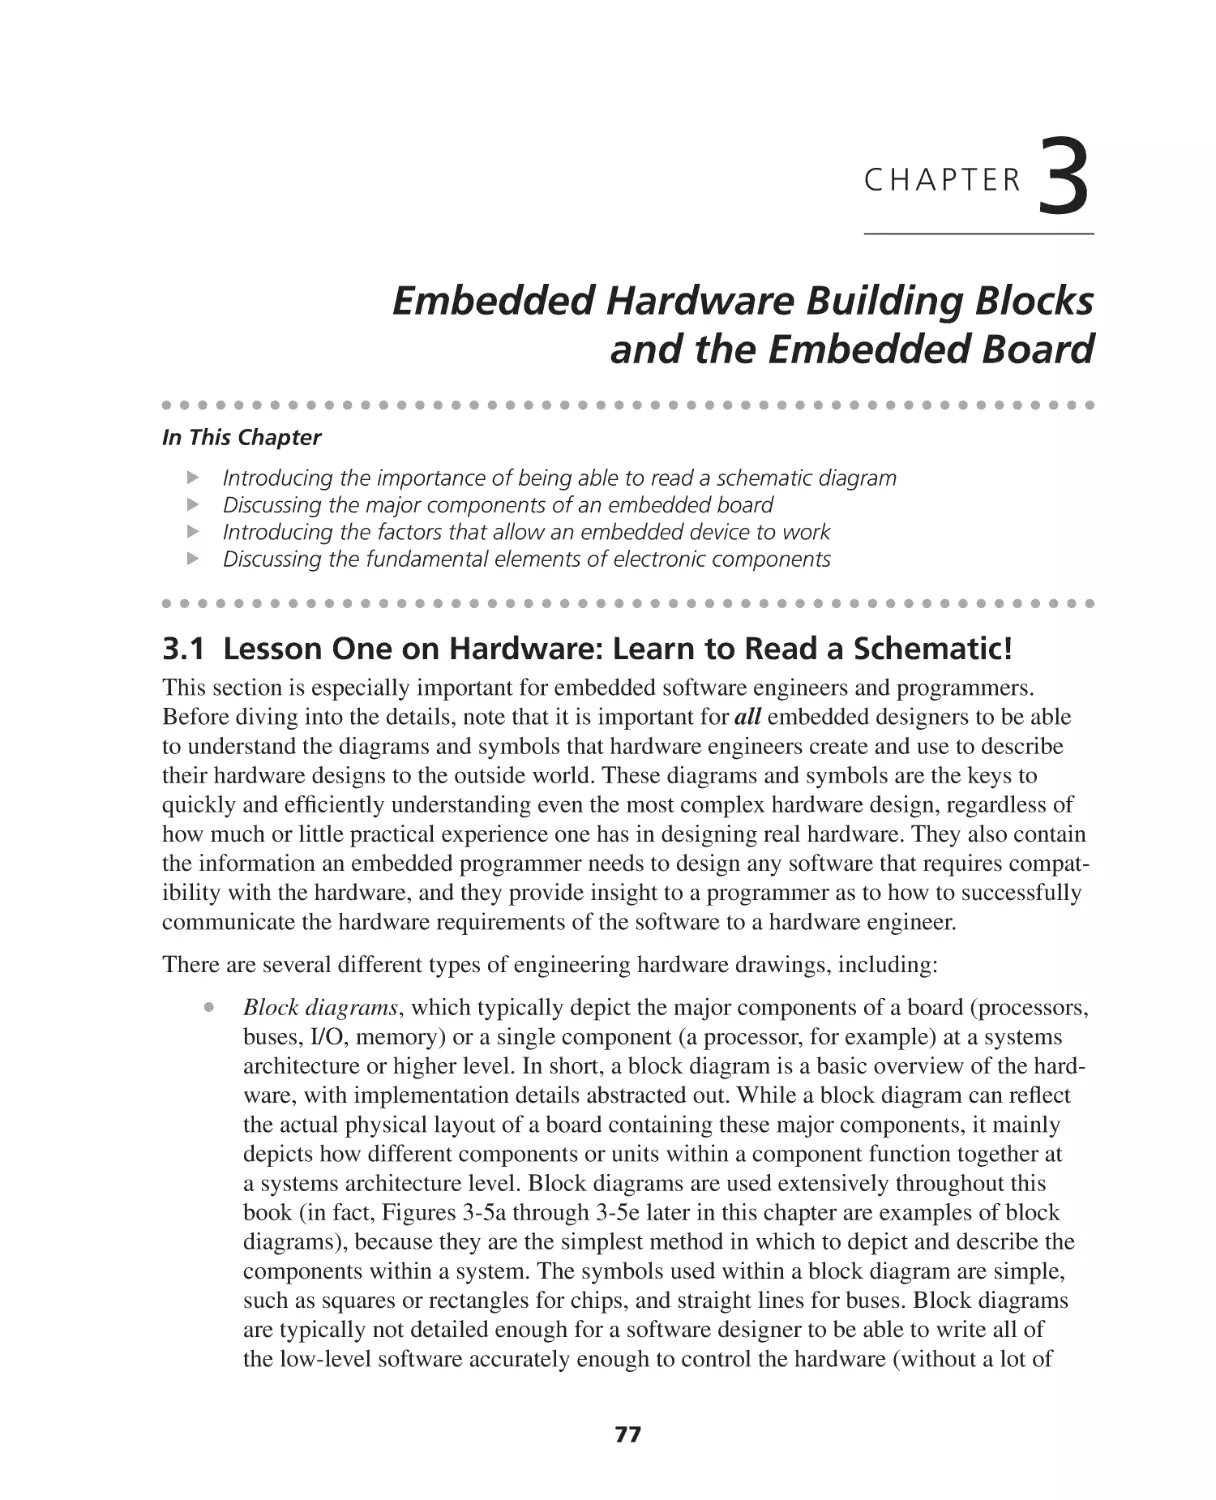 Chapter 3. Embedded Hardware Building Blocks and the Embedded Board
3.1 Lesson One on Hardware